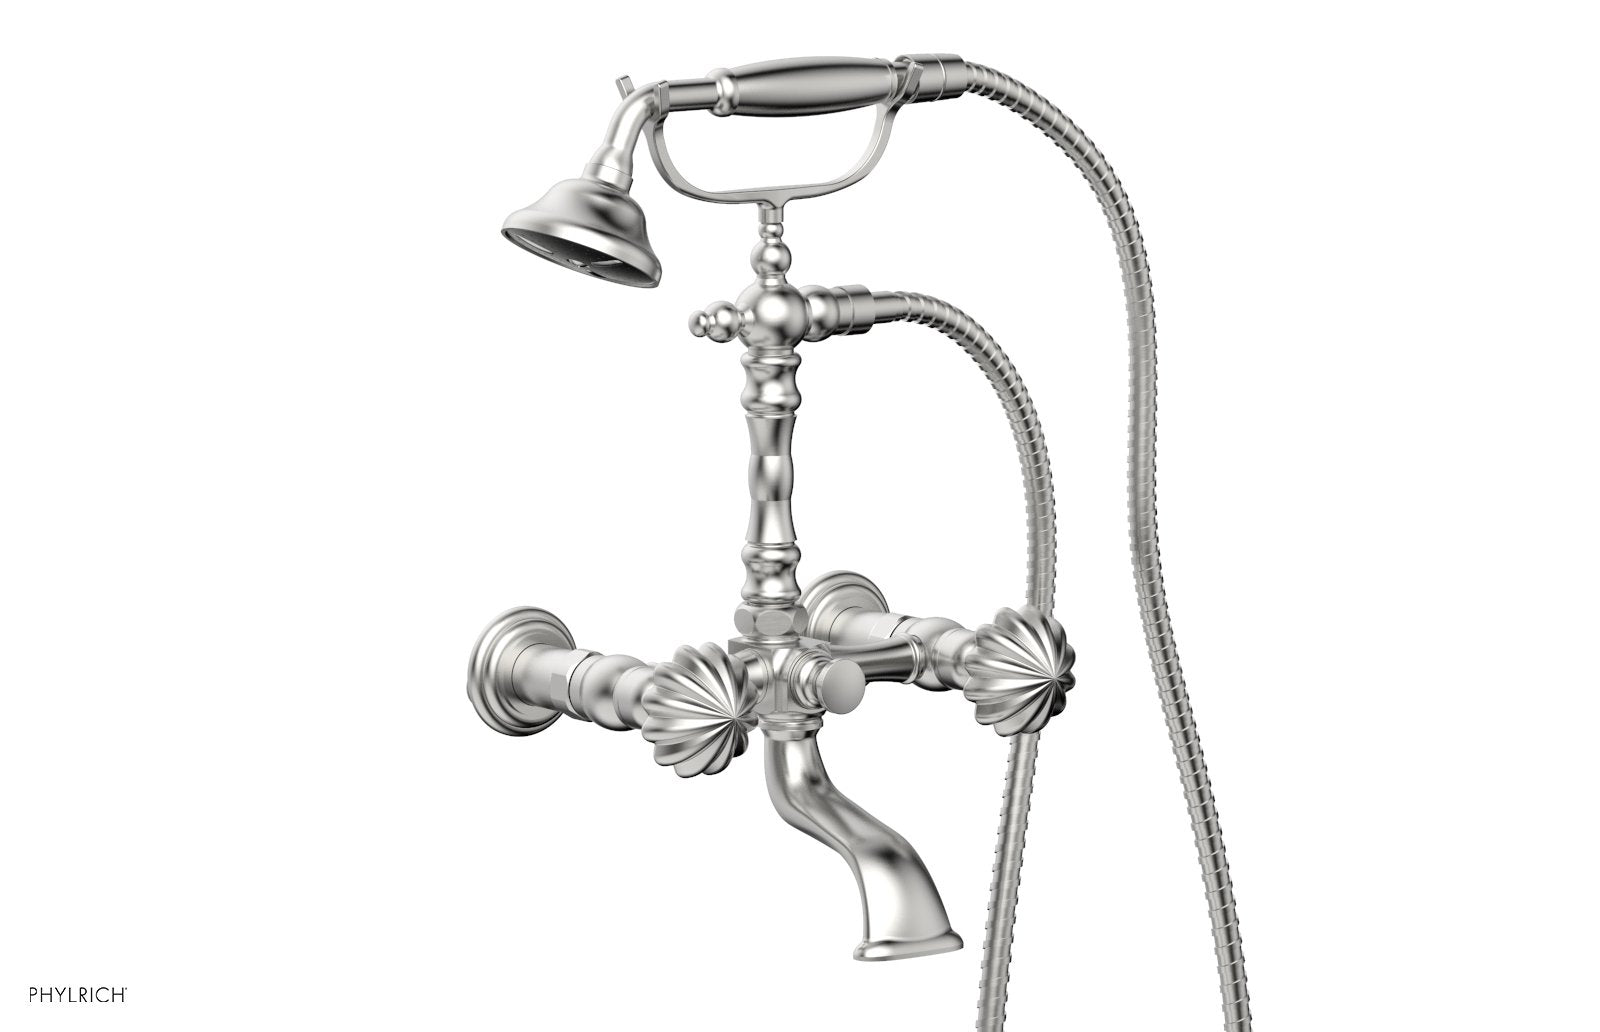 Phylrich GEORGIAN & BARCELONA Exposed Tub & Hand Shower - Round Handle